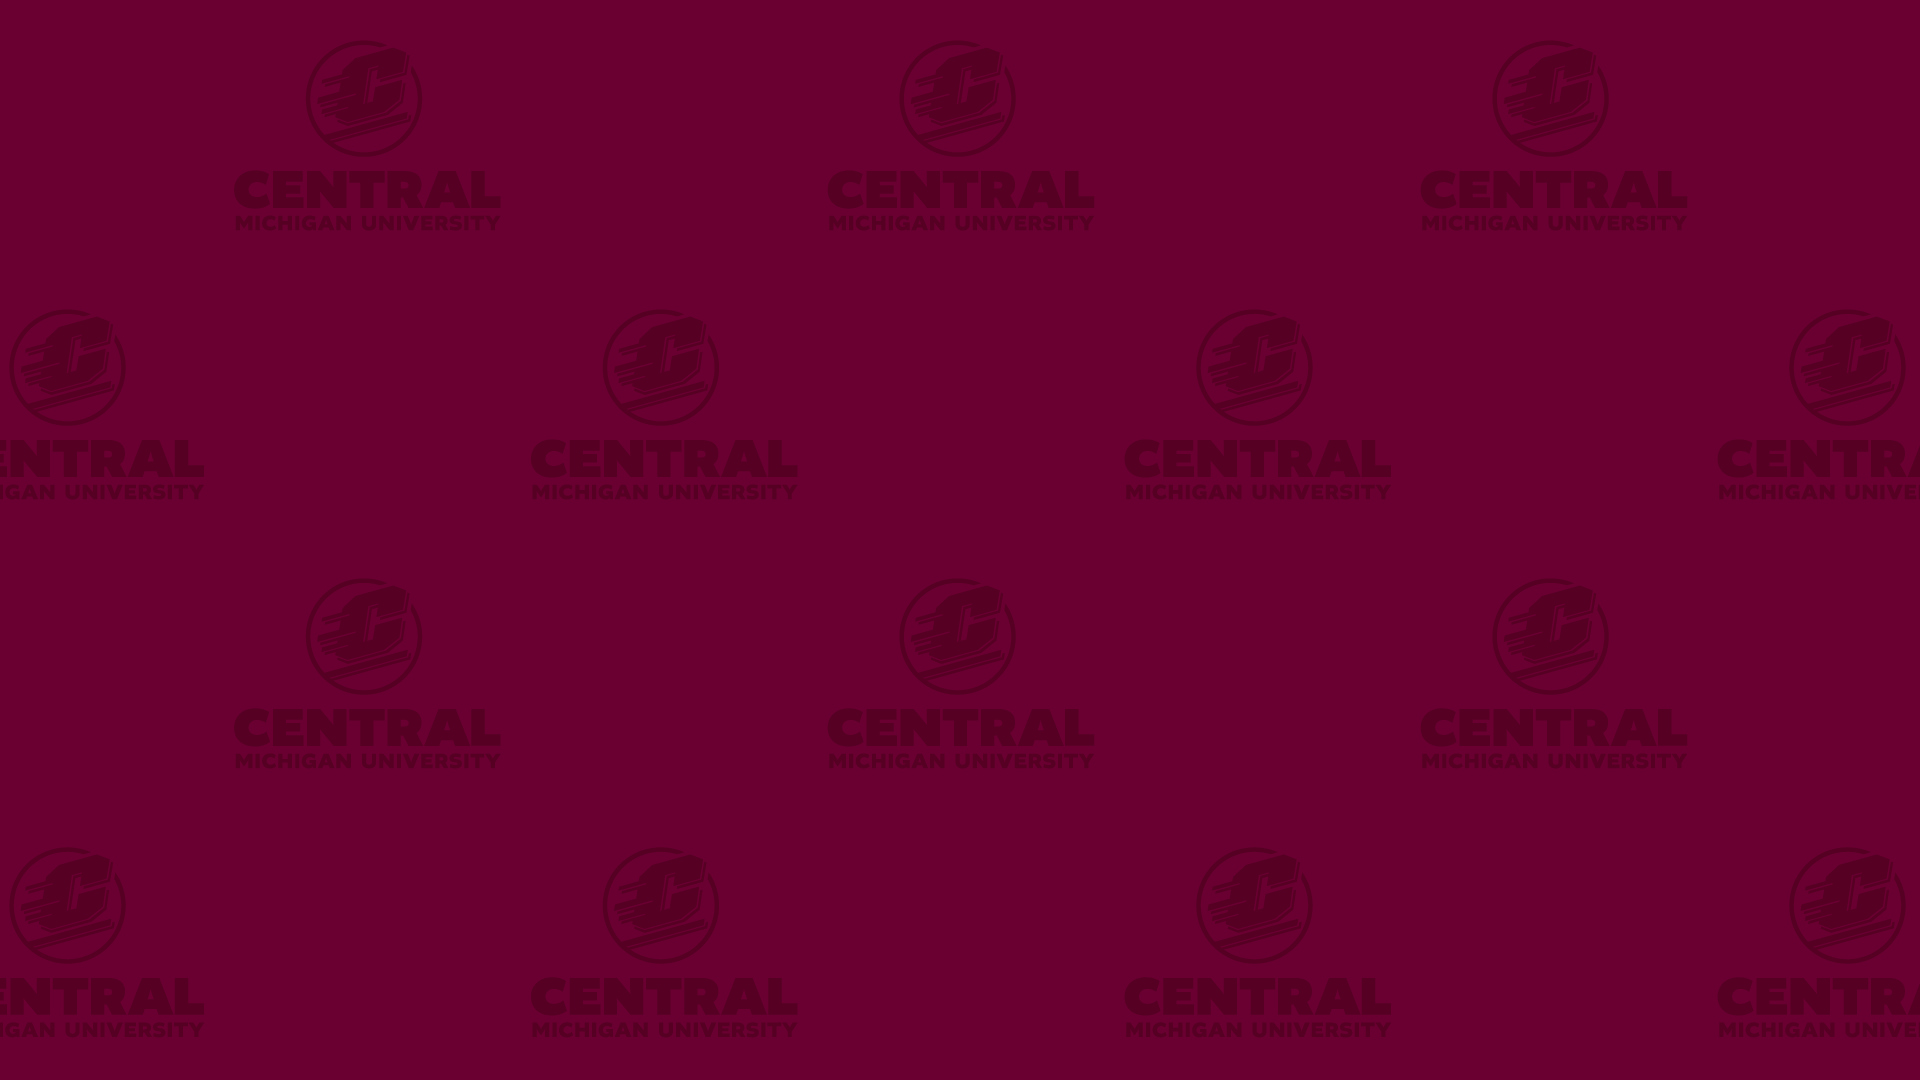 Central Michigan university signature repeated several time in maroon background